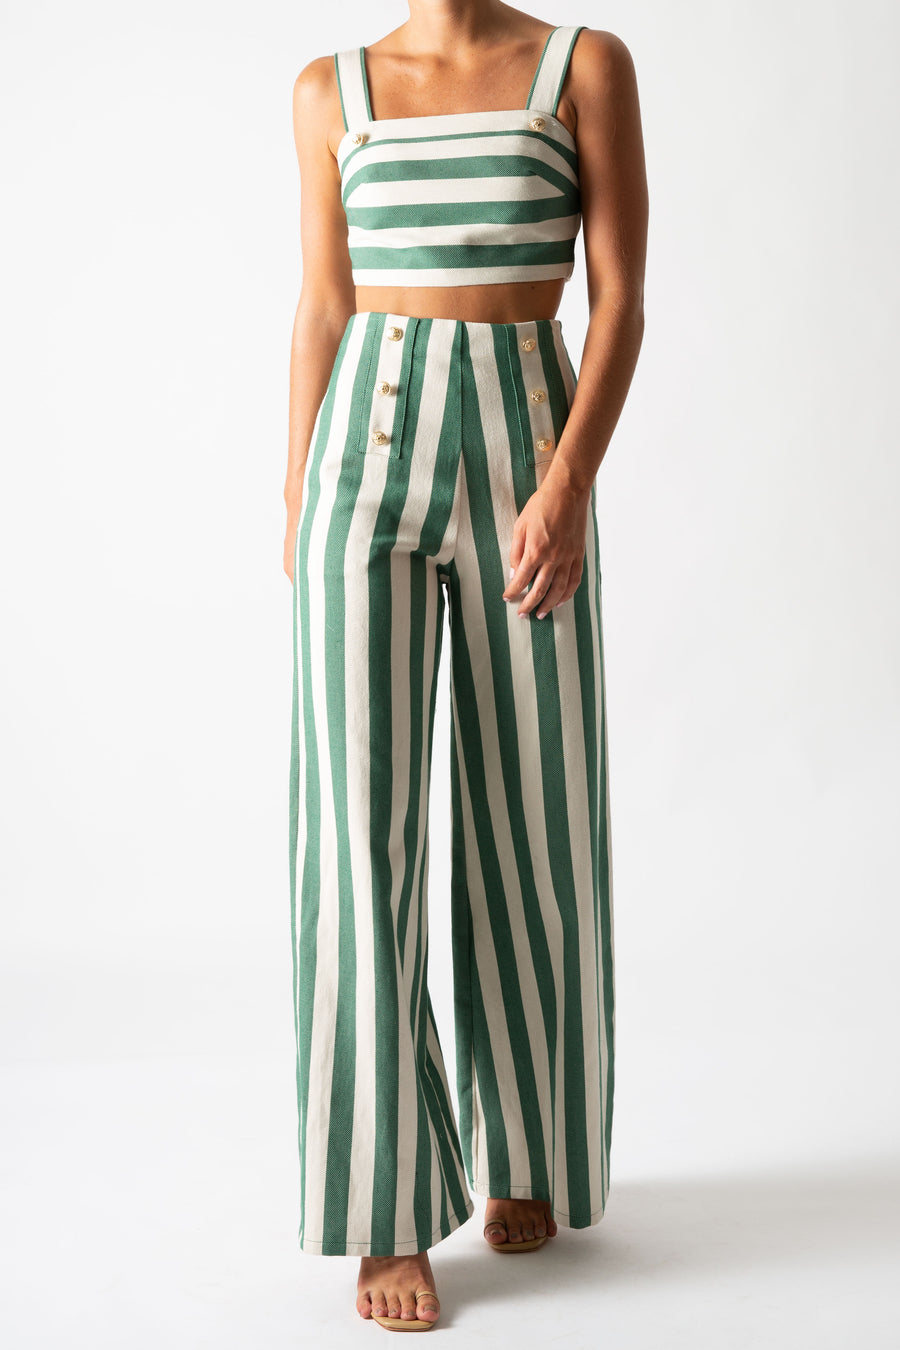 This is a photo of a woman wearing a matching two piece green striped set with gold buttons.  The pants are high waisted and long with a flare and the top is cropped with straps.